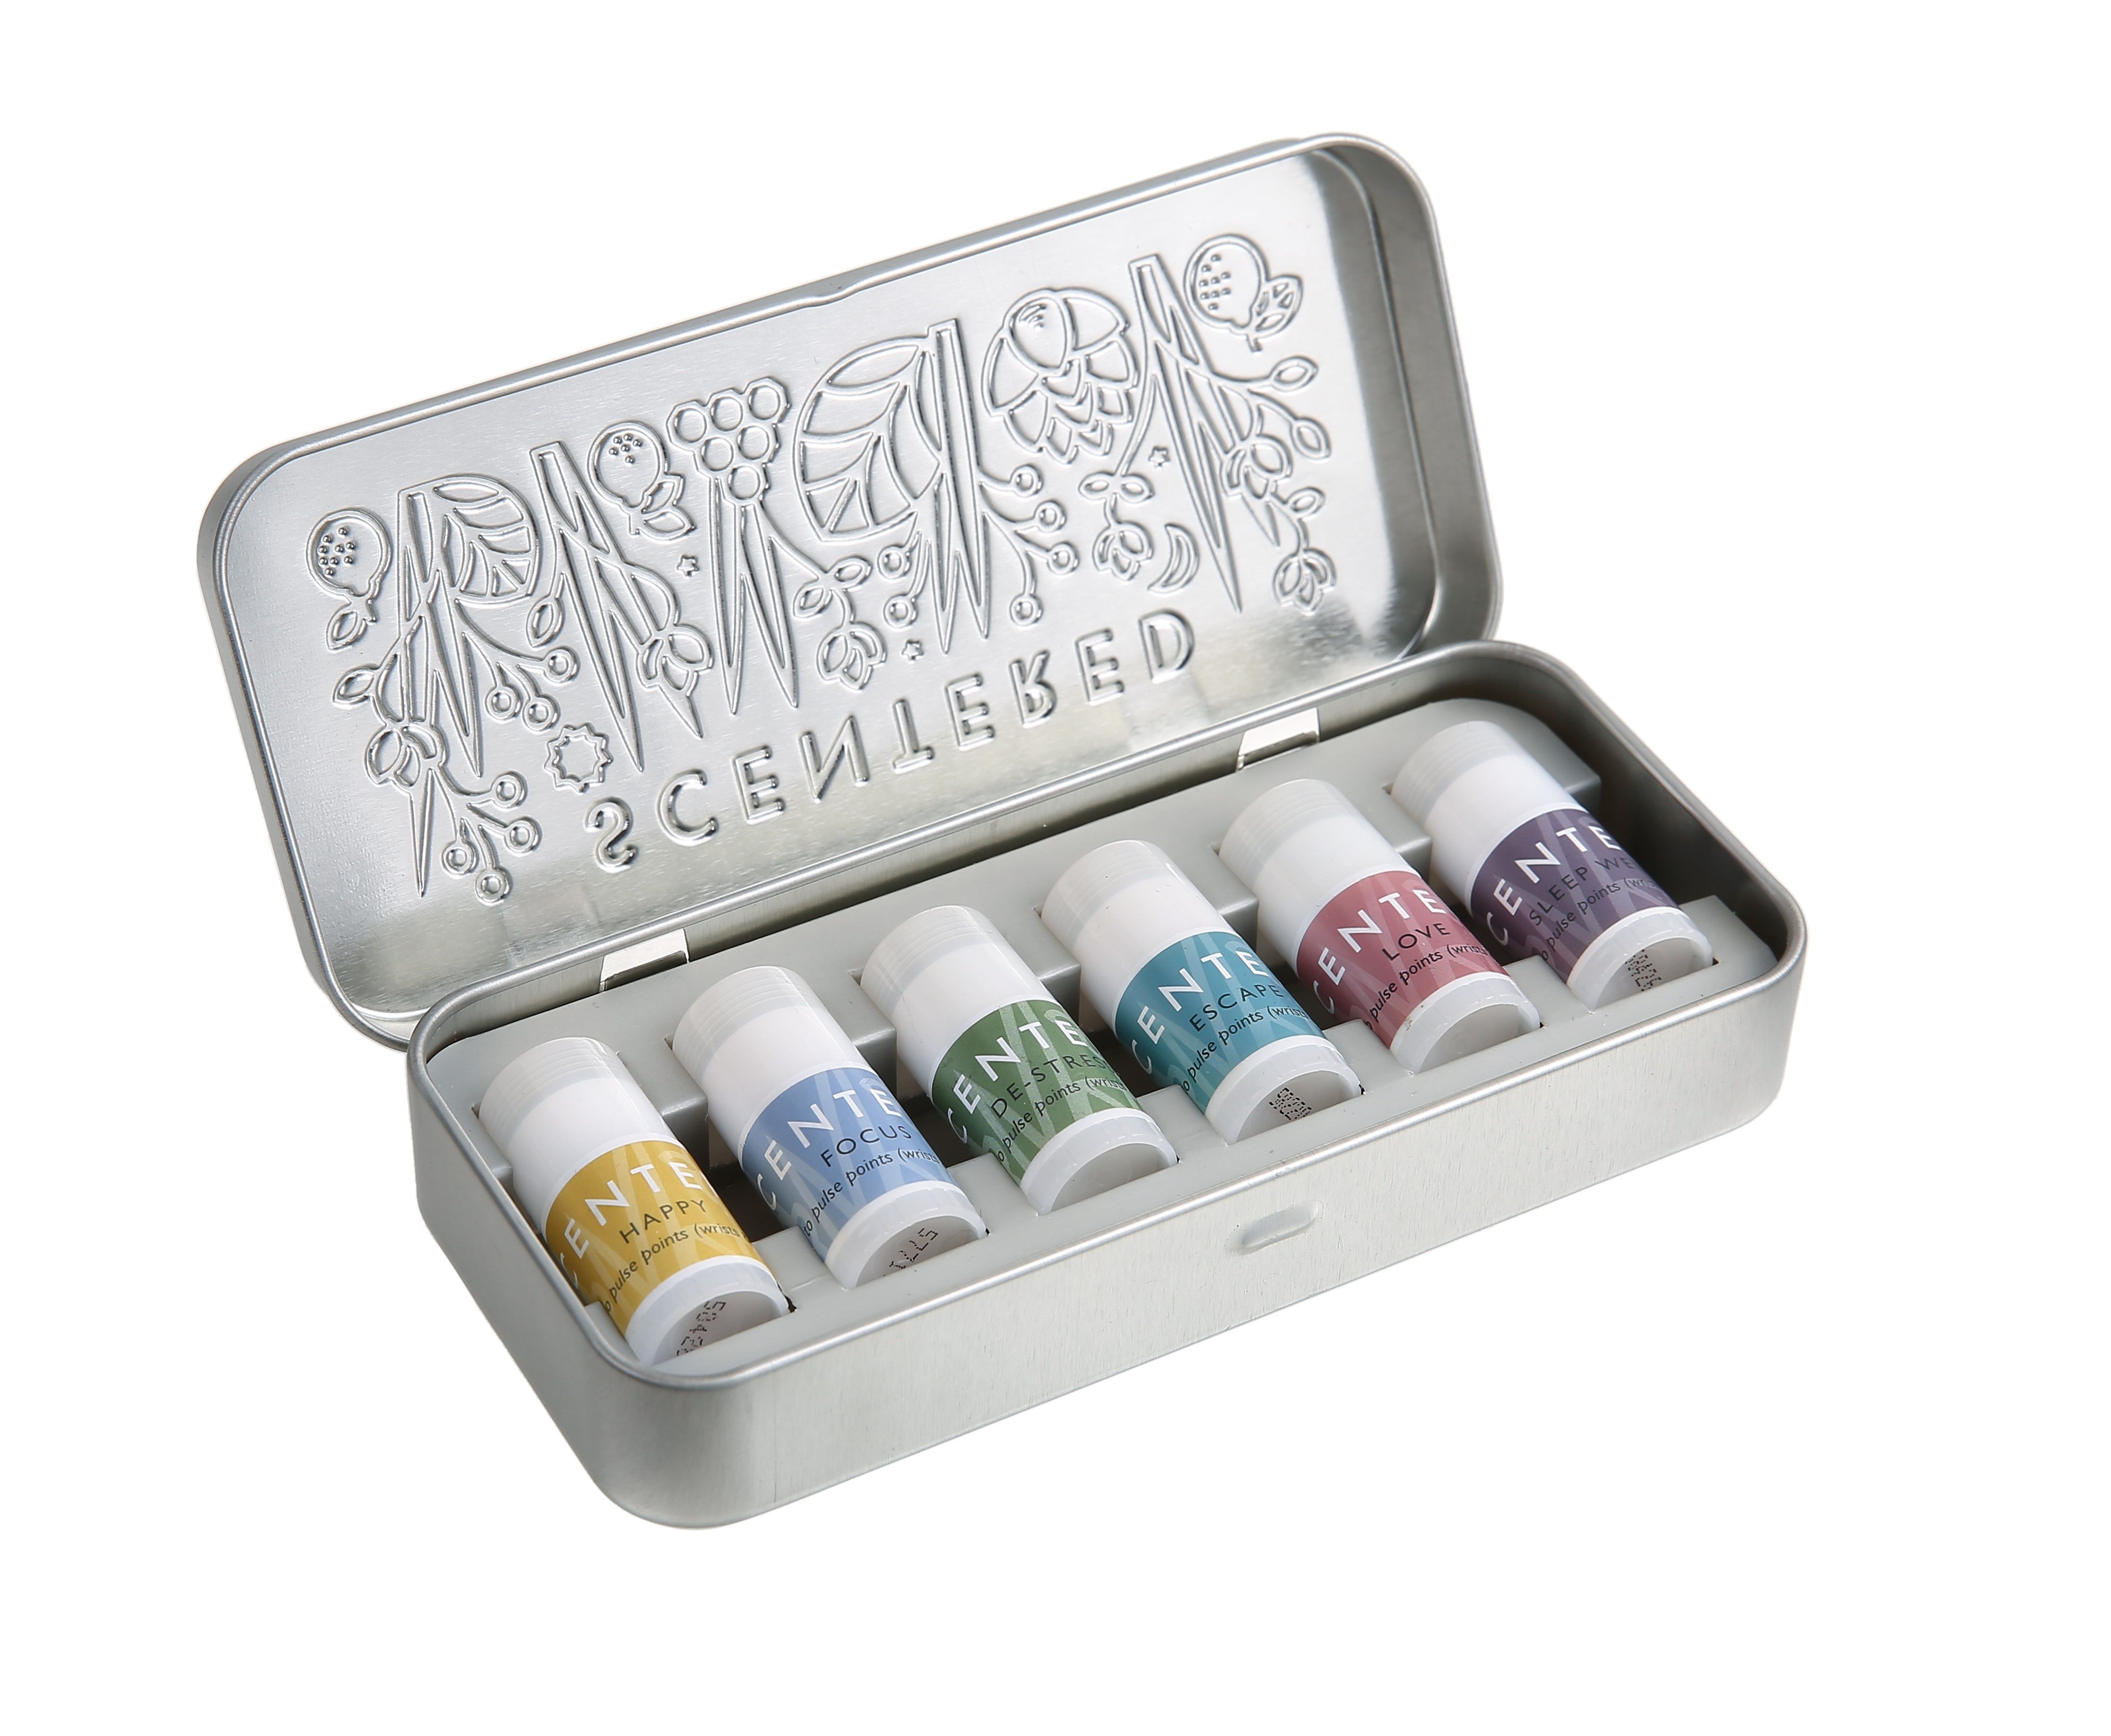 Scentered Aromatherapy Discovery Starter Tin open showing the 6 Scentered aromatherapy mini  balms inside.  These are Happy, Focus, De-stress, Escape, Love  and Sleep Well Aromatherapy Mini balm pulse point sticks 1.5g